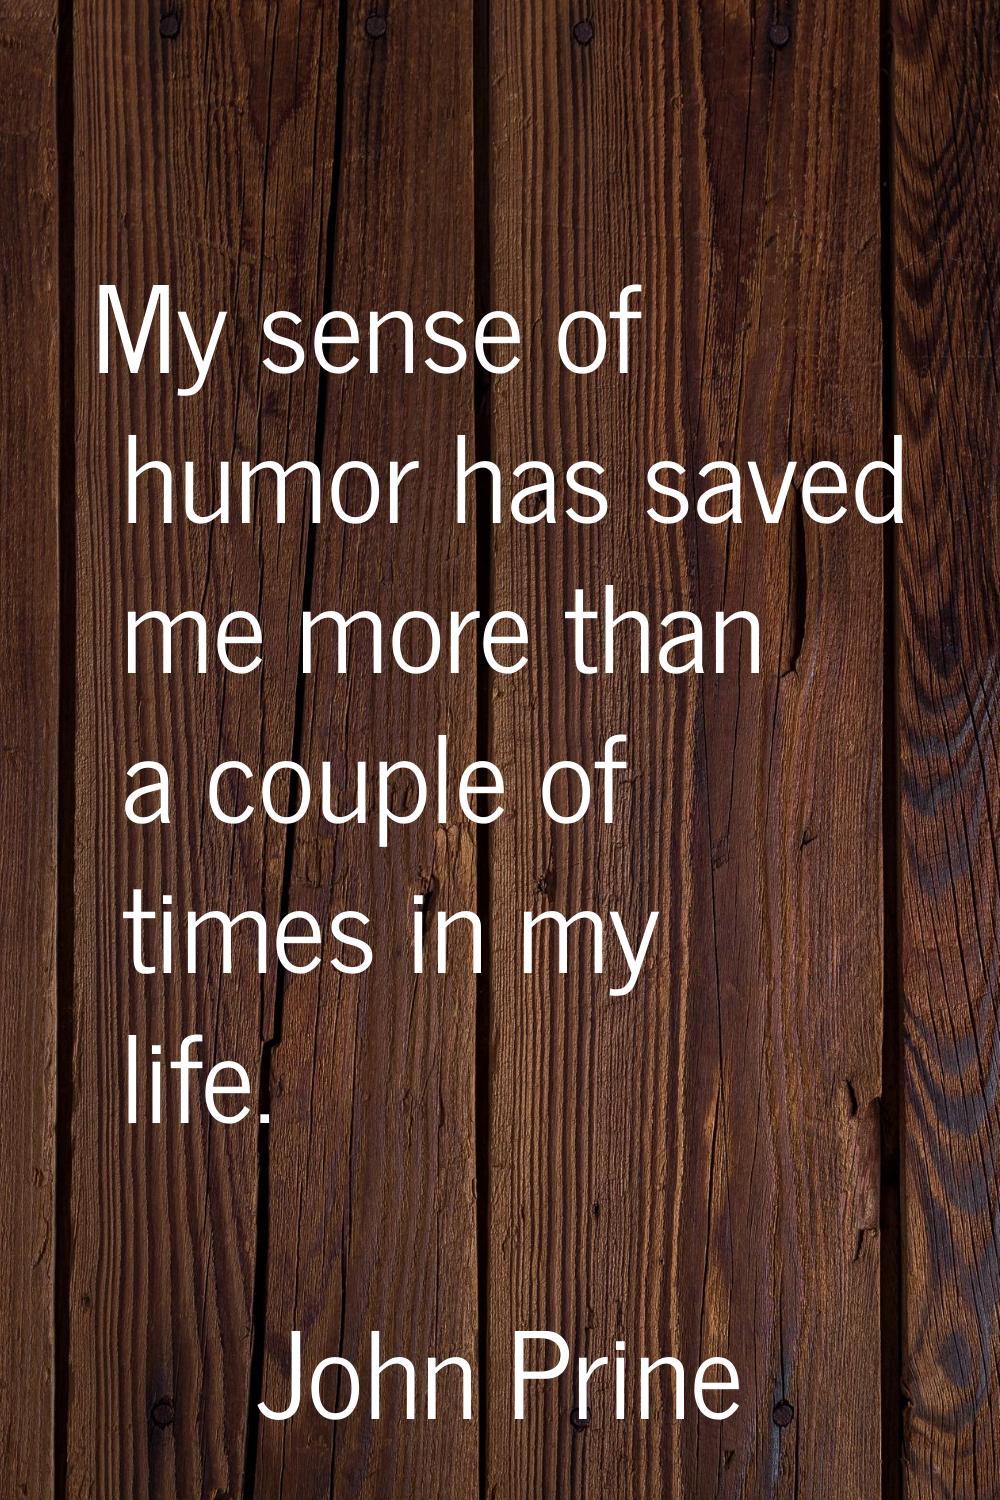 My sense of humor has saved me more than a couple of times in my life.